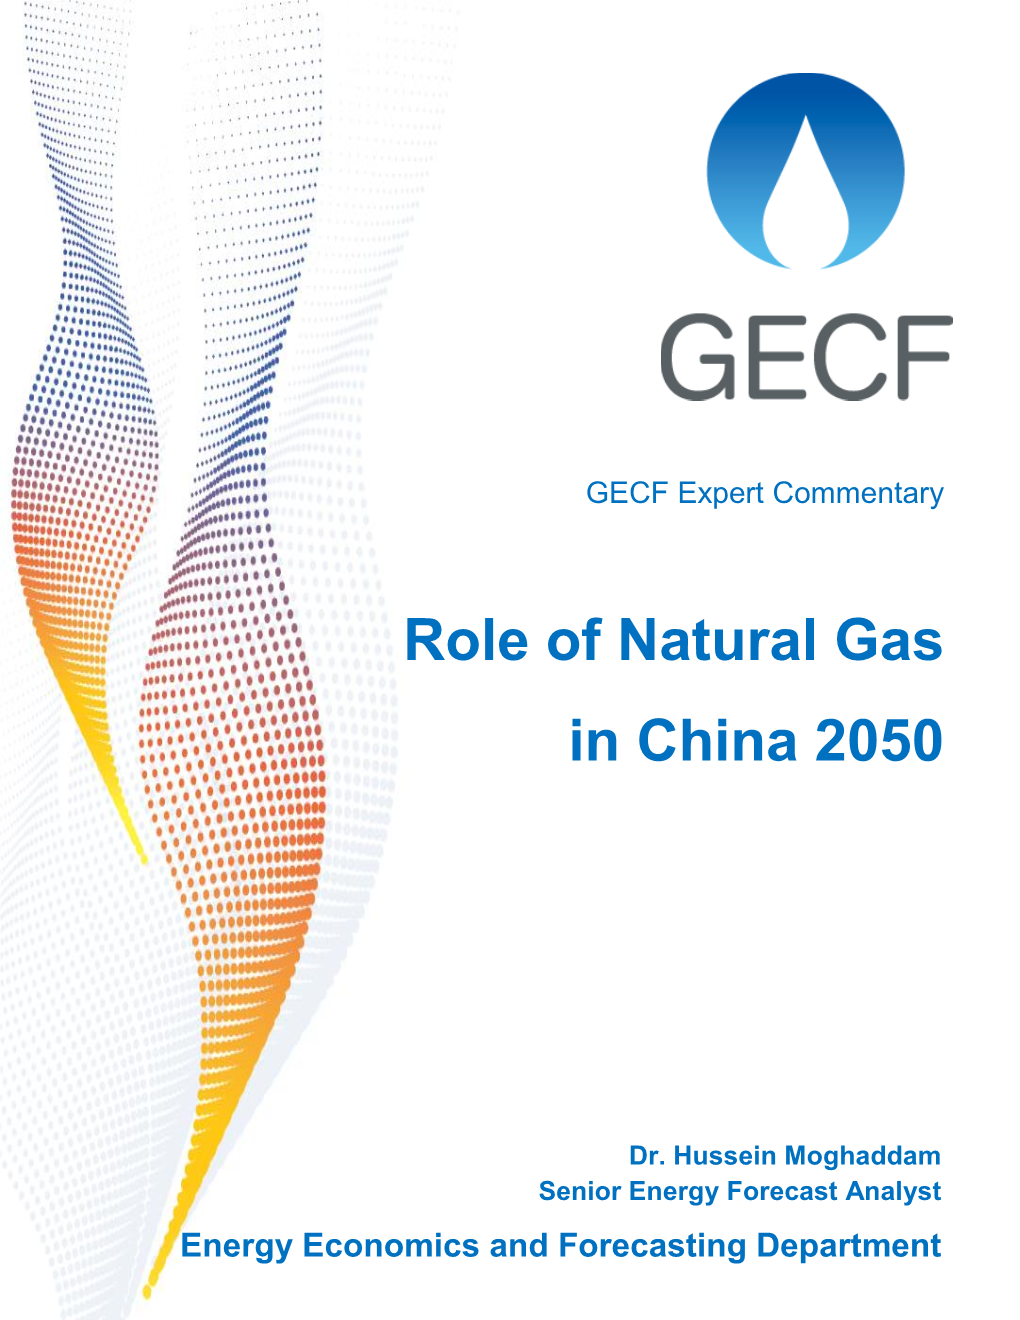 Role of Natural Gas in China 2050